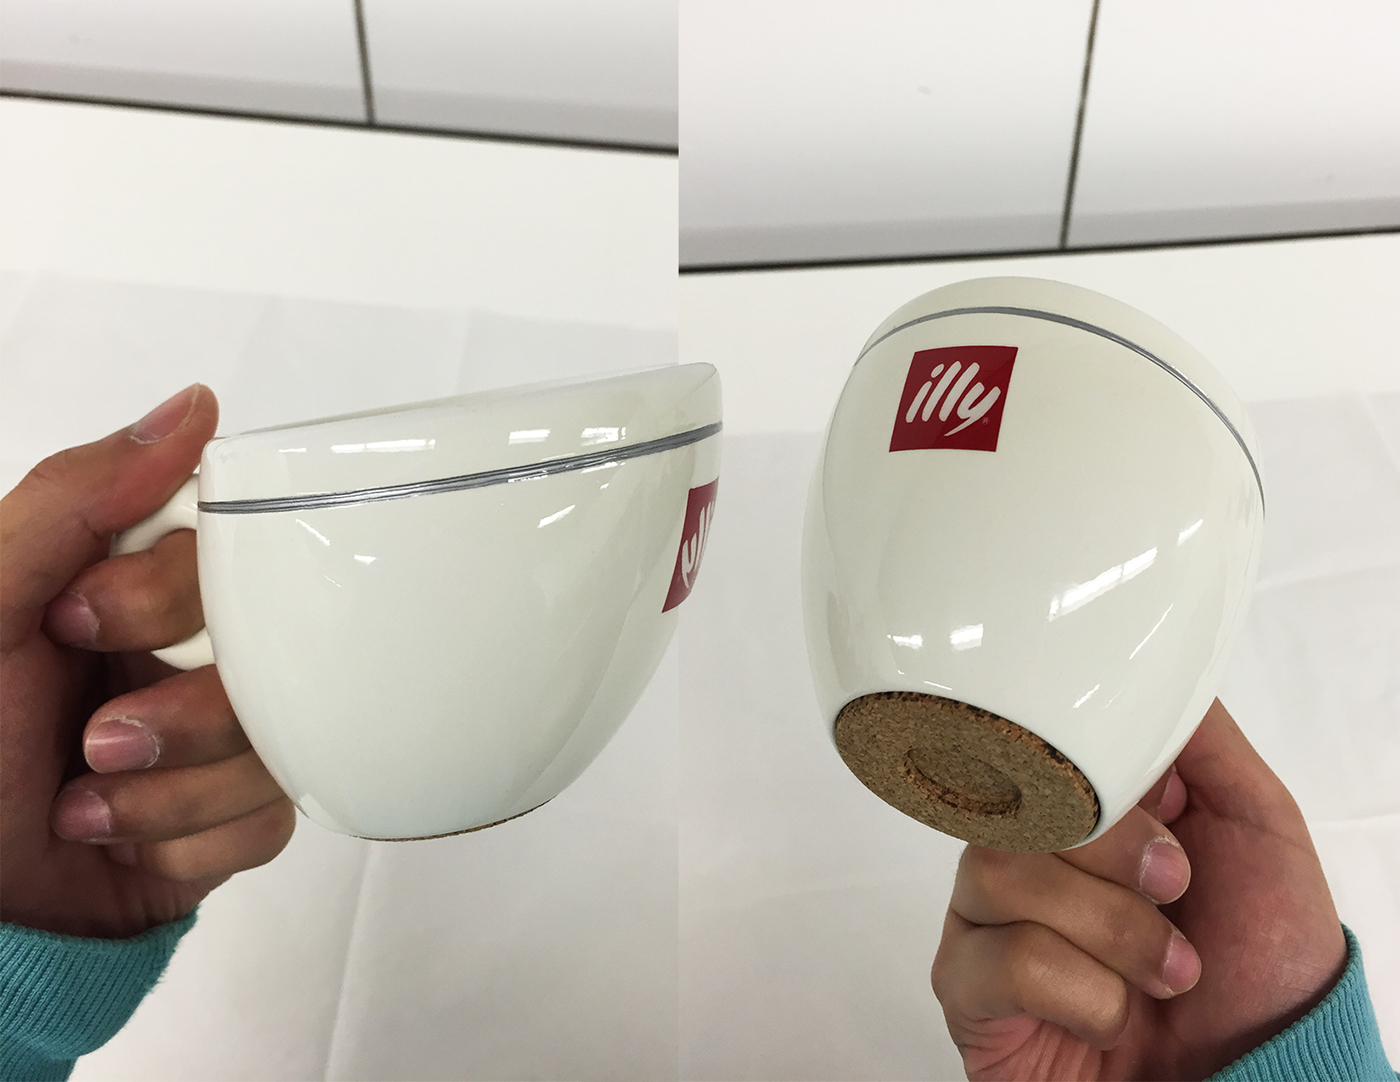 illy coffee cup sketch Solidworks 3d printing Model Making